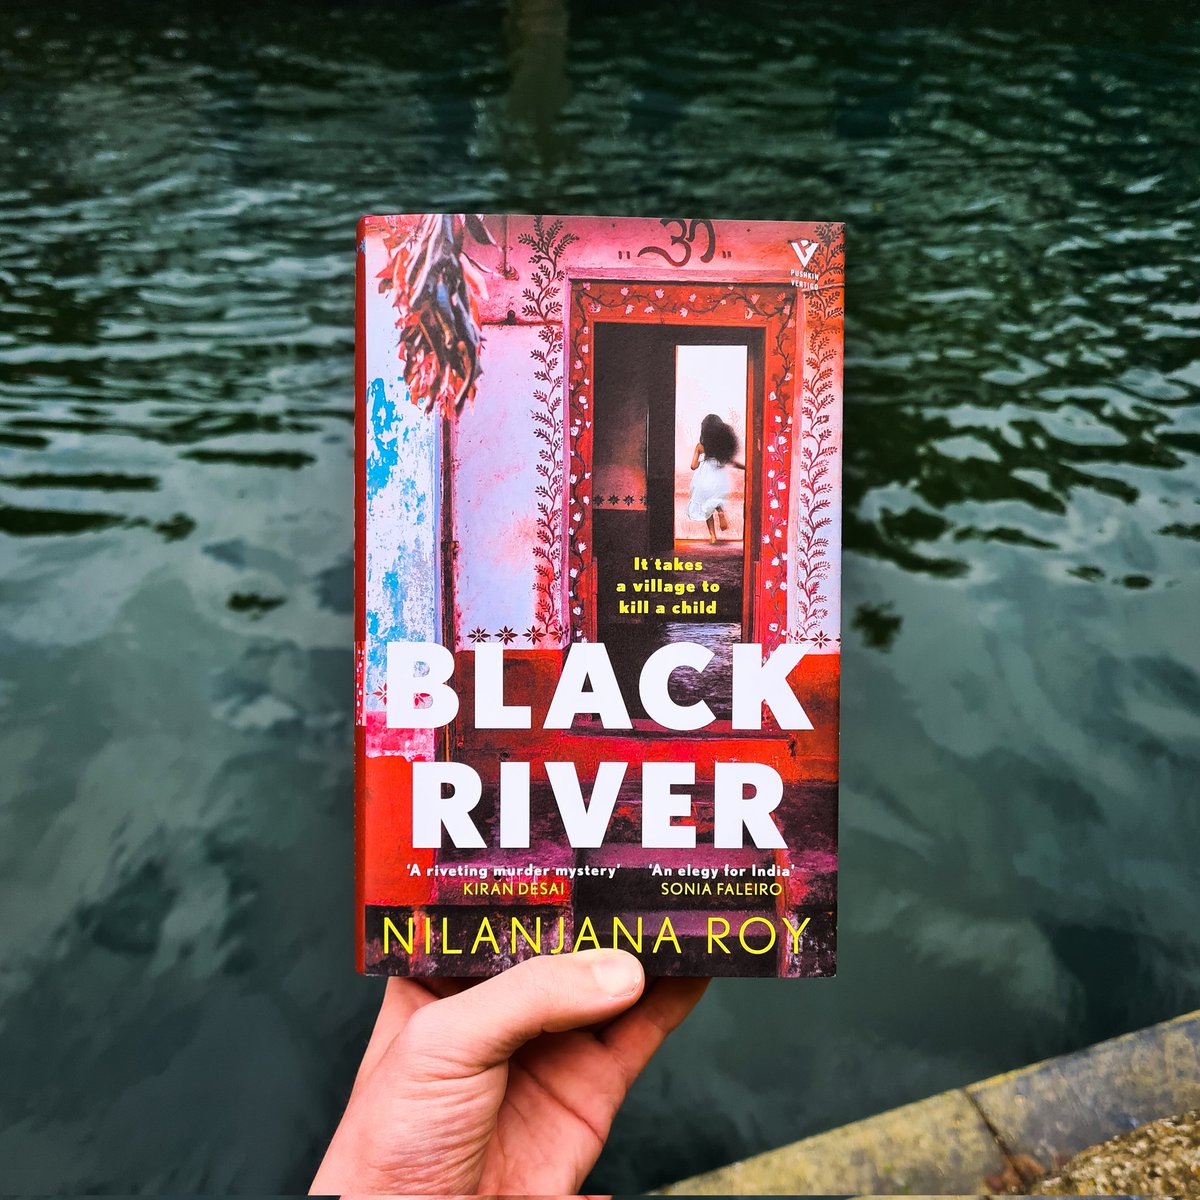 Nilanjana Roy's astonishing literary thriller Black River is published today! @nilanjanaroy It takes a village to kill a child… Read more about #BlackRiver below: